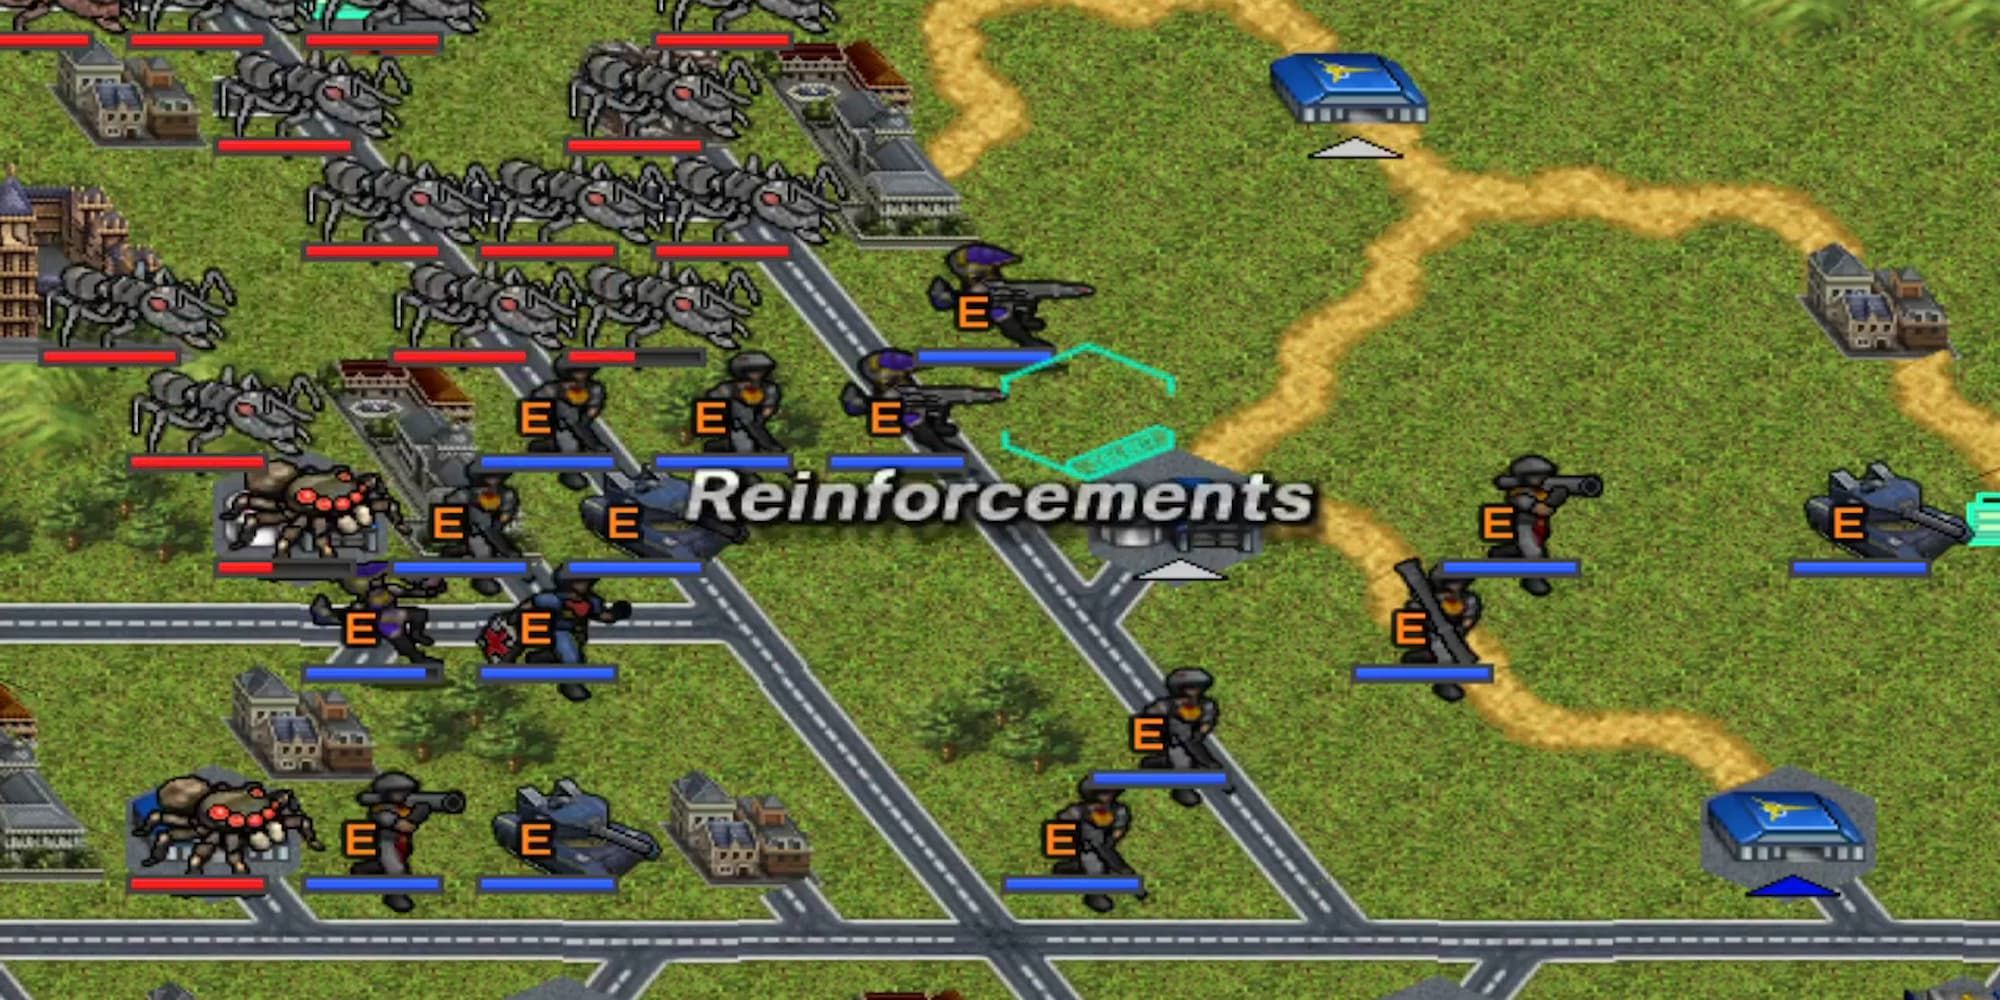 Reinforcments have arrived in Global Defence Force Tactics.